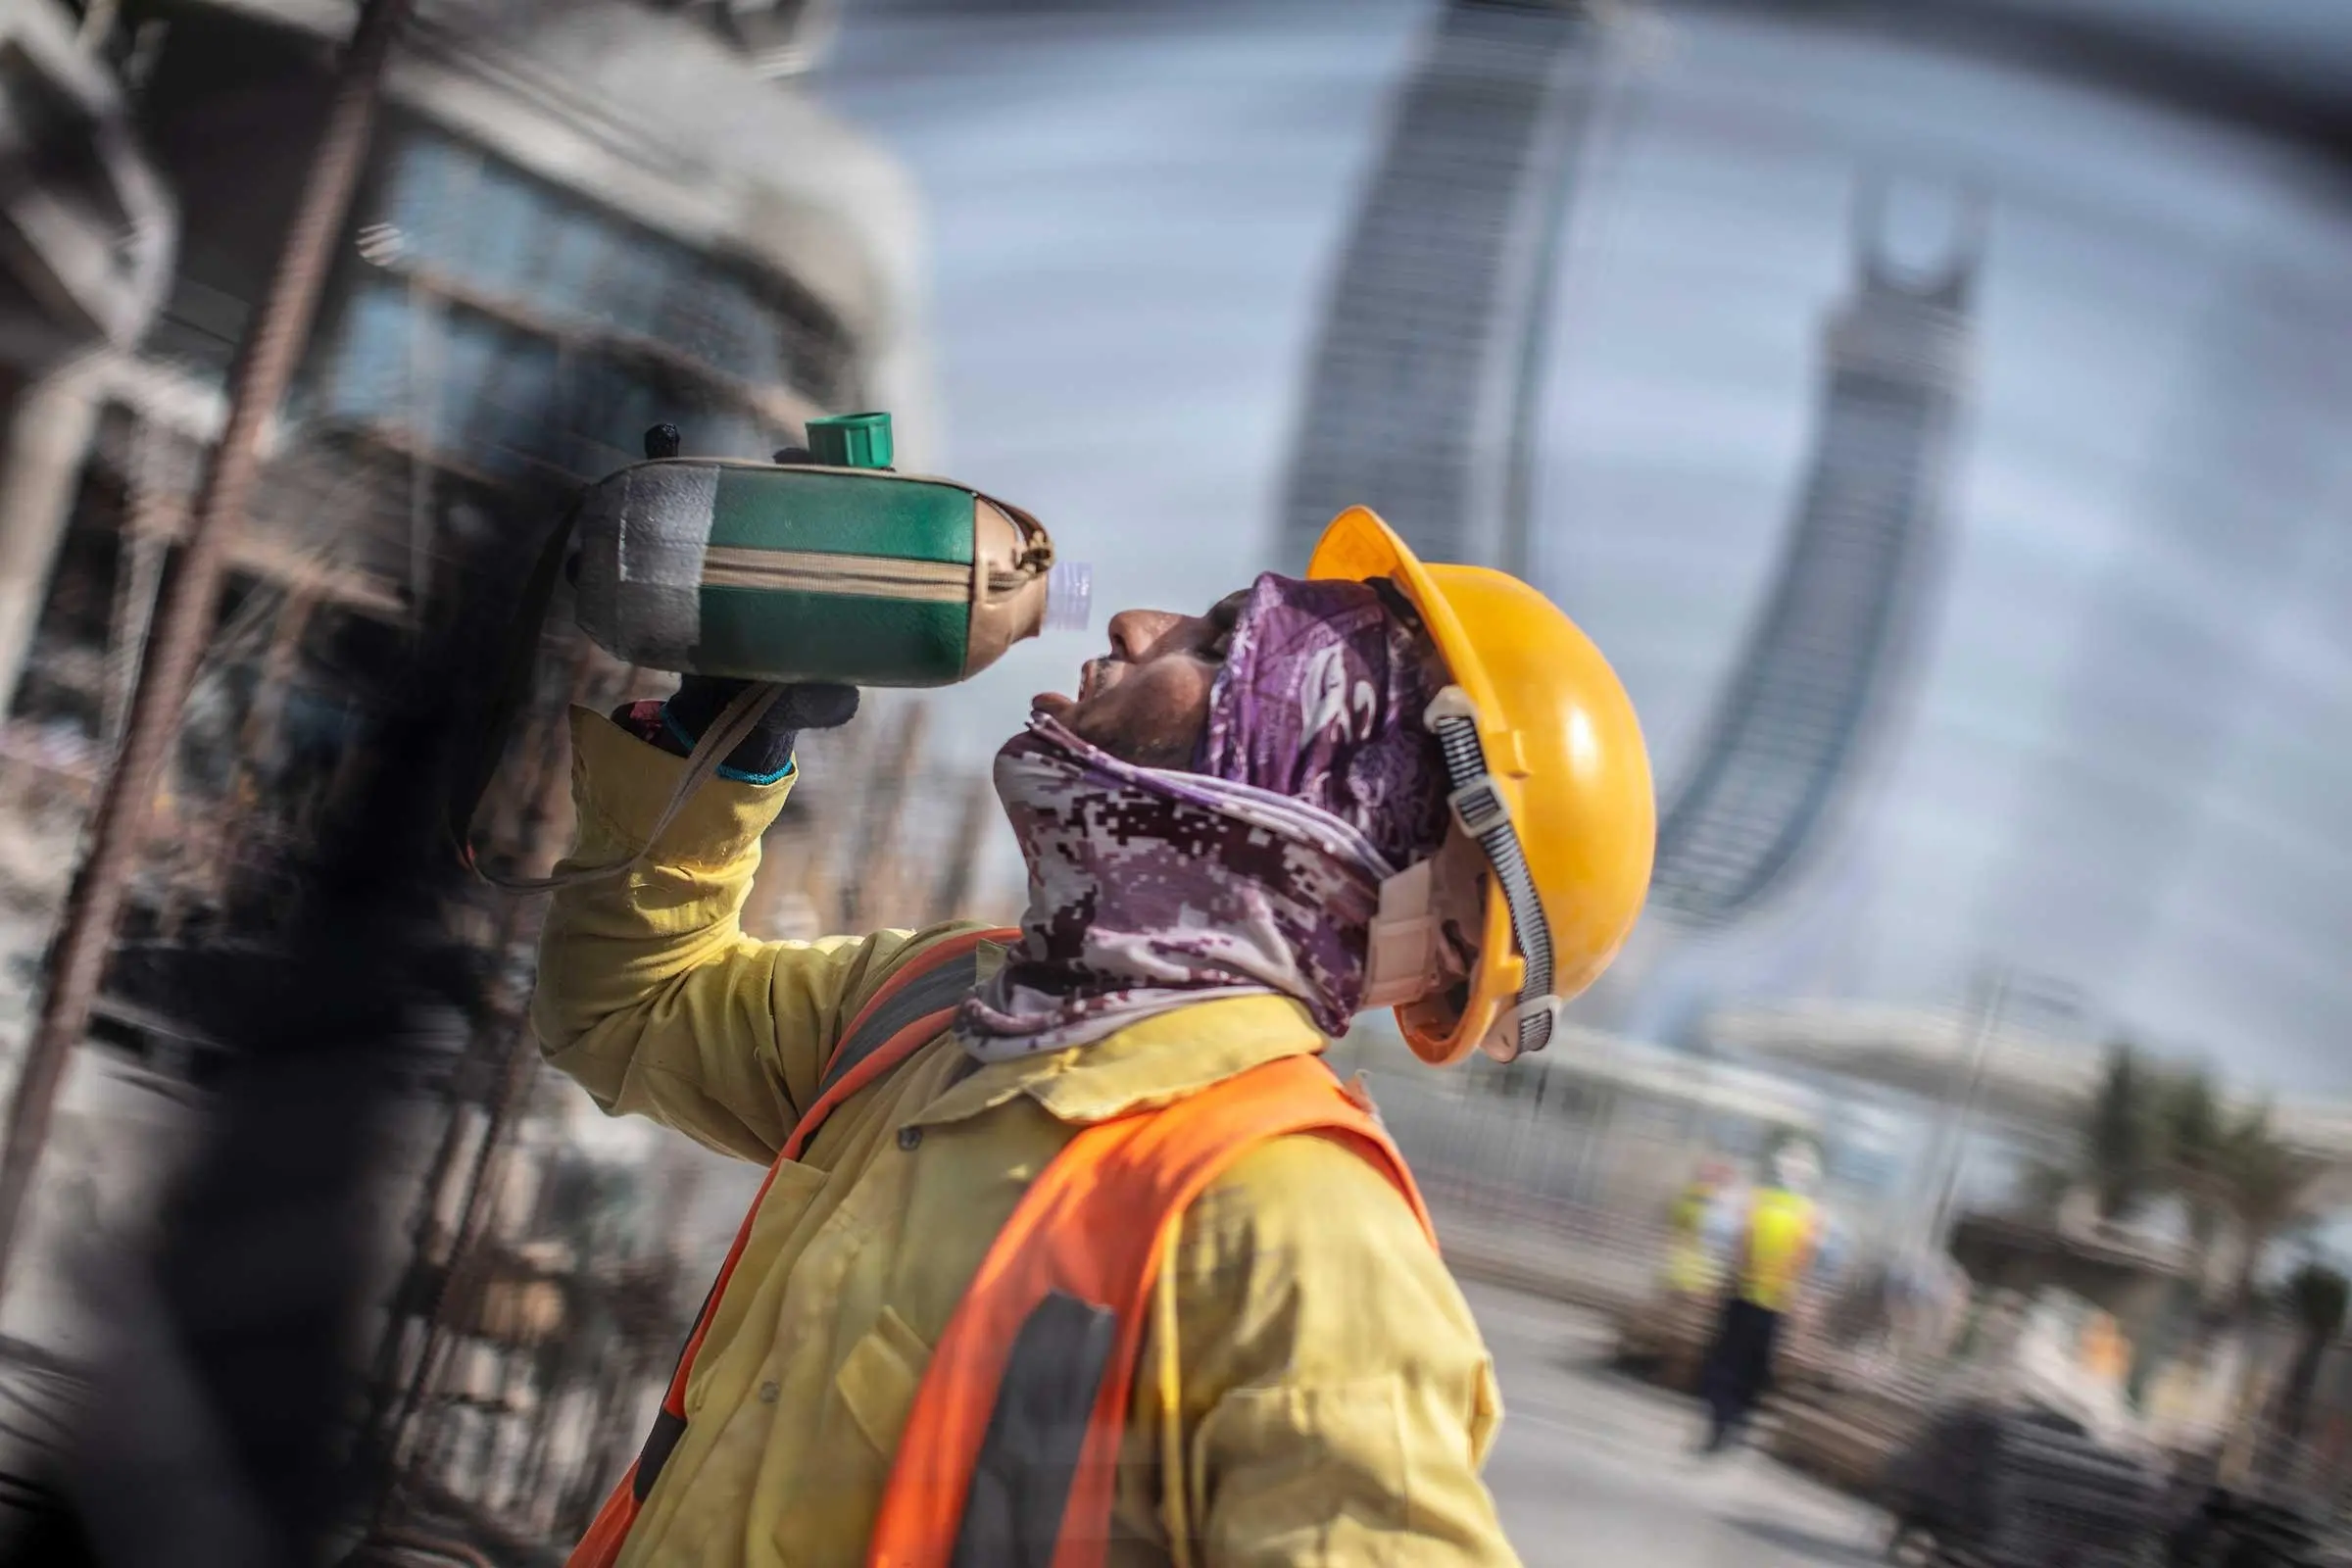 A man in construction gear drinks water from a bottle while working.